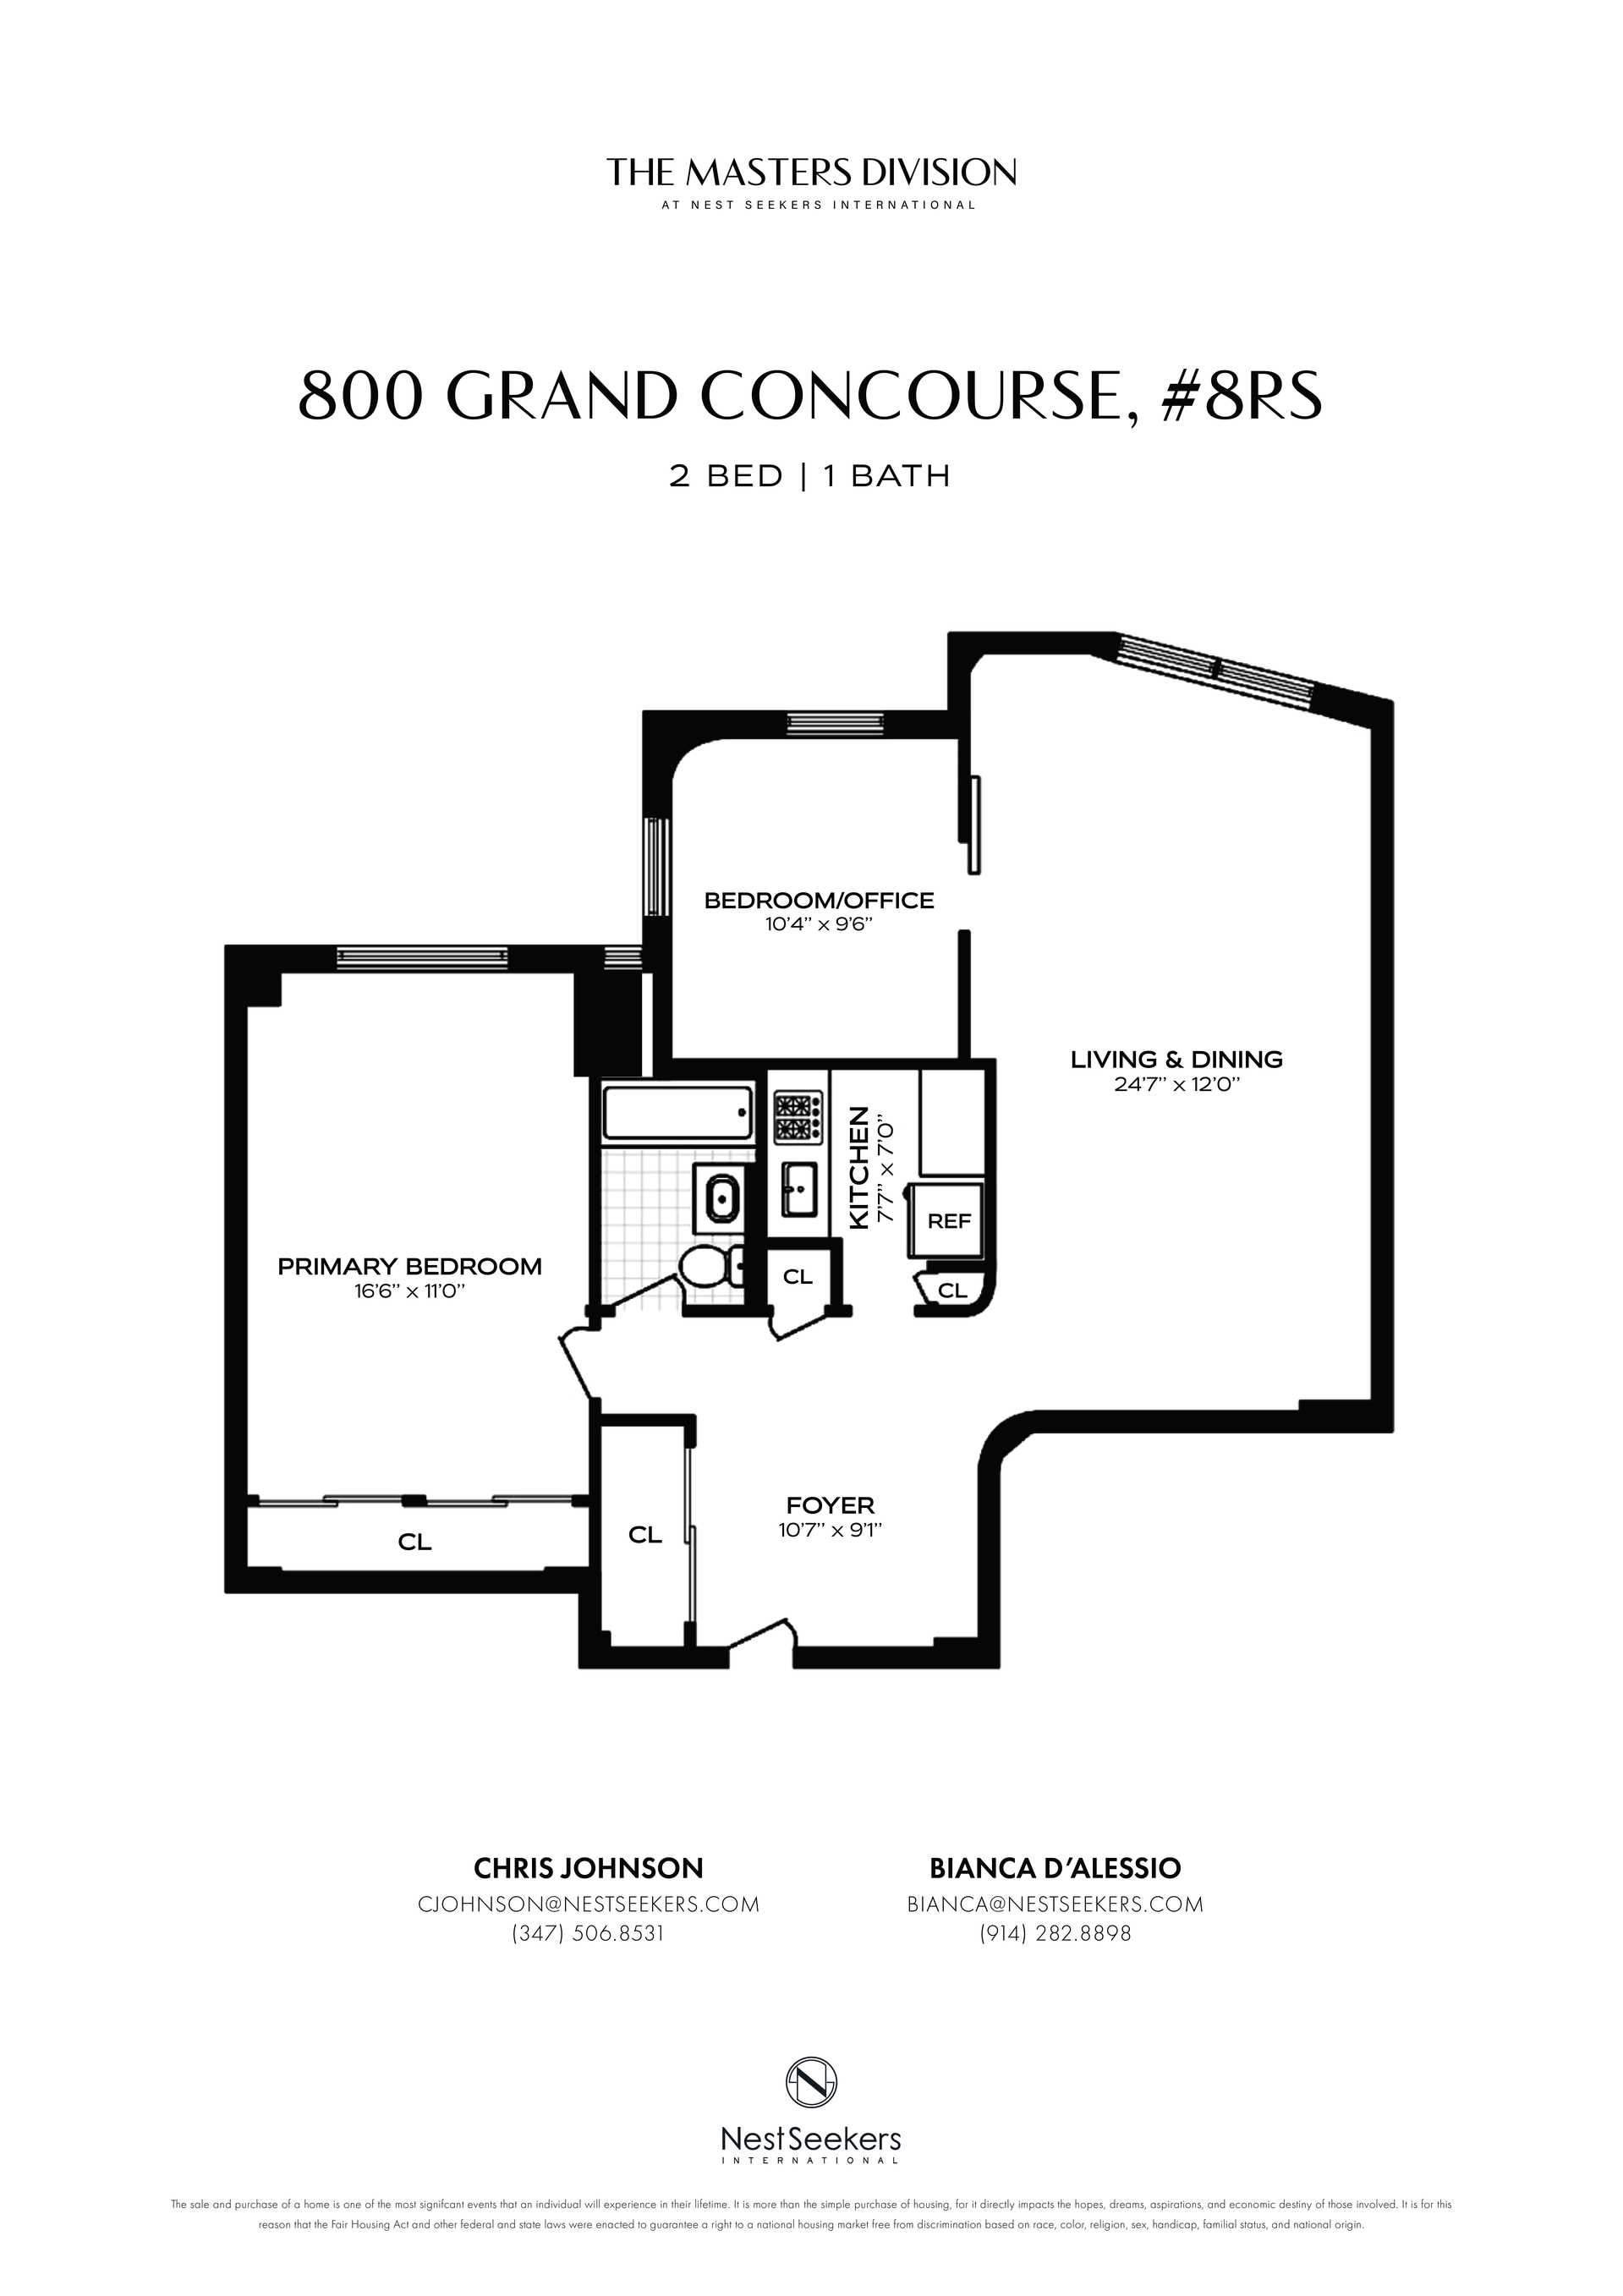 Floorplan for 800 Grand Concourse, 3-RS